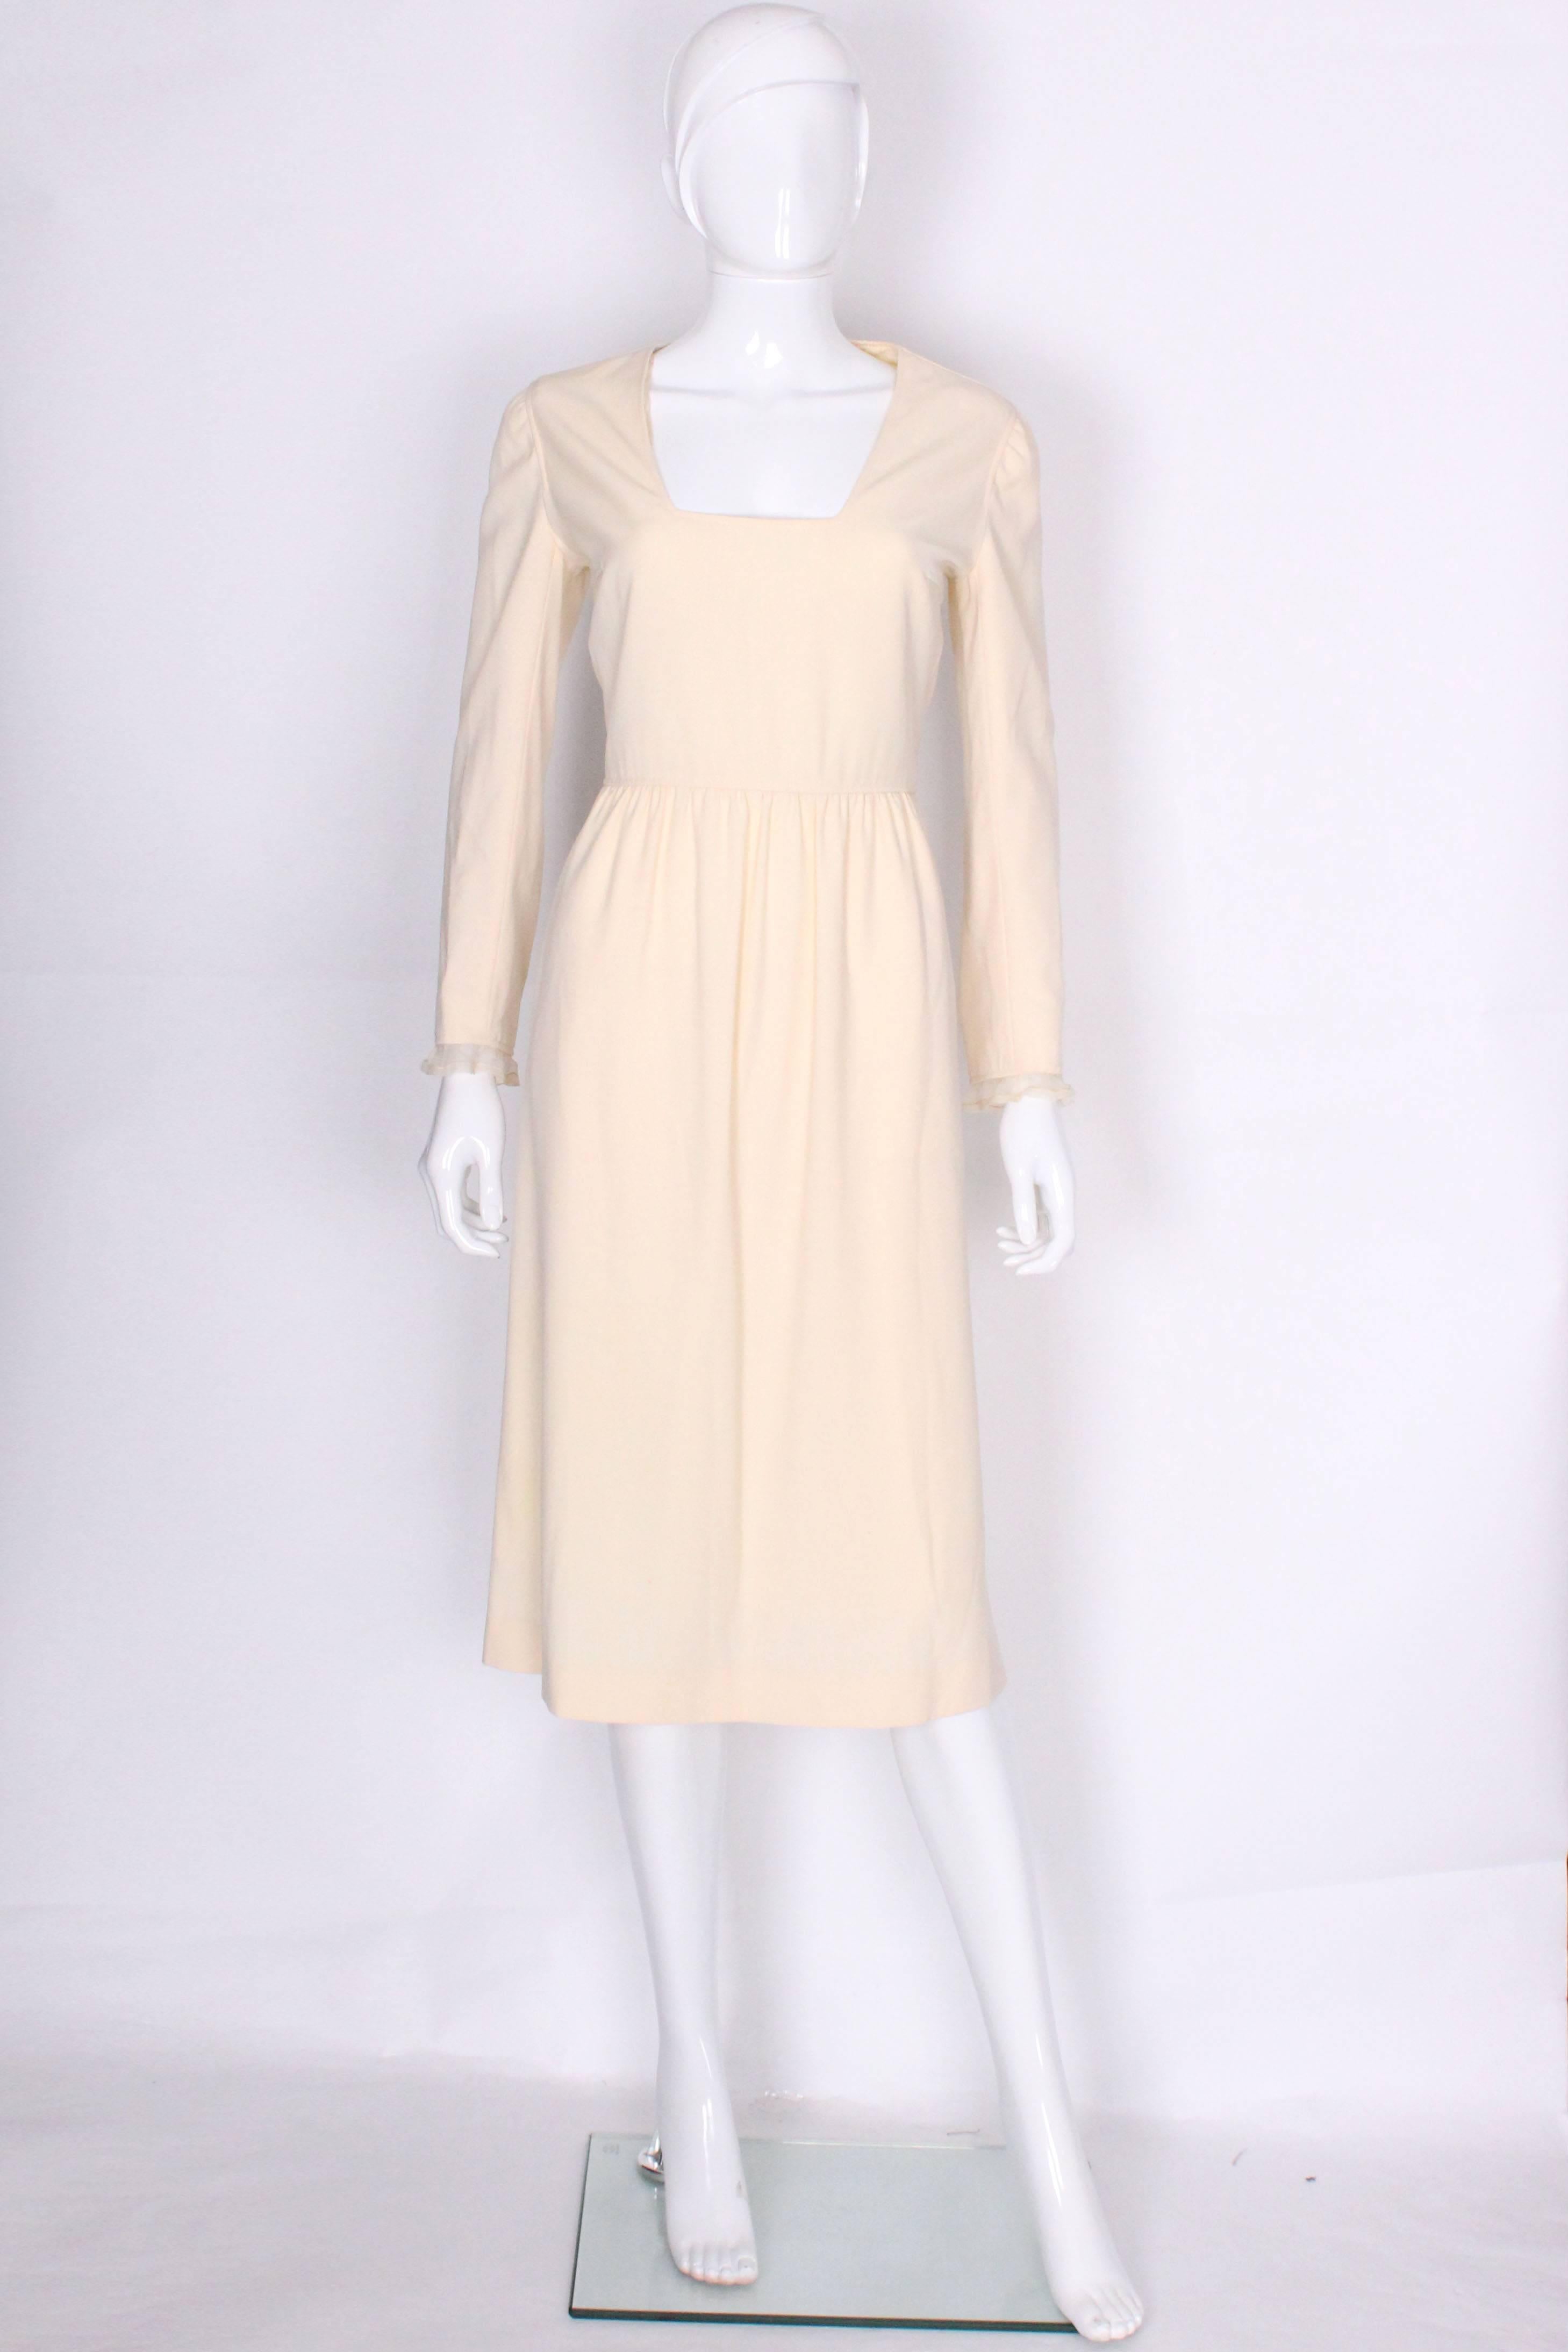 A chic dress by French designer Courreges. In a cream wool with silk lining, this dress is perfect for parties or  even a bride.The dress has a square neckline, a 7 button opening at the back and silk chiffon frills at the cuff. The seam work is